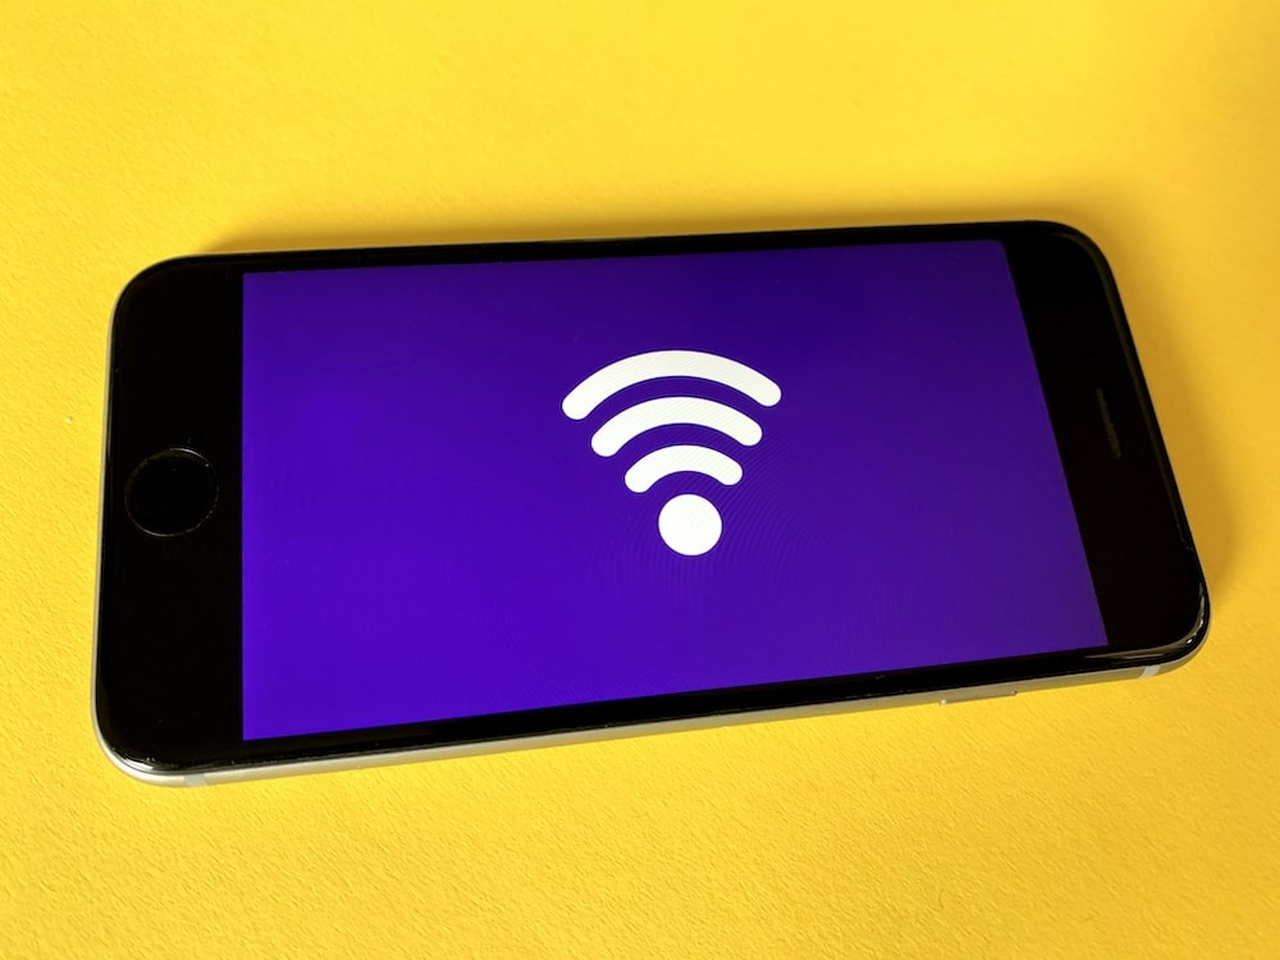 a wireless icon on a purple background of a mobile phone on the yellow background